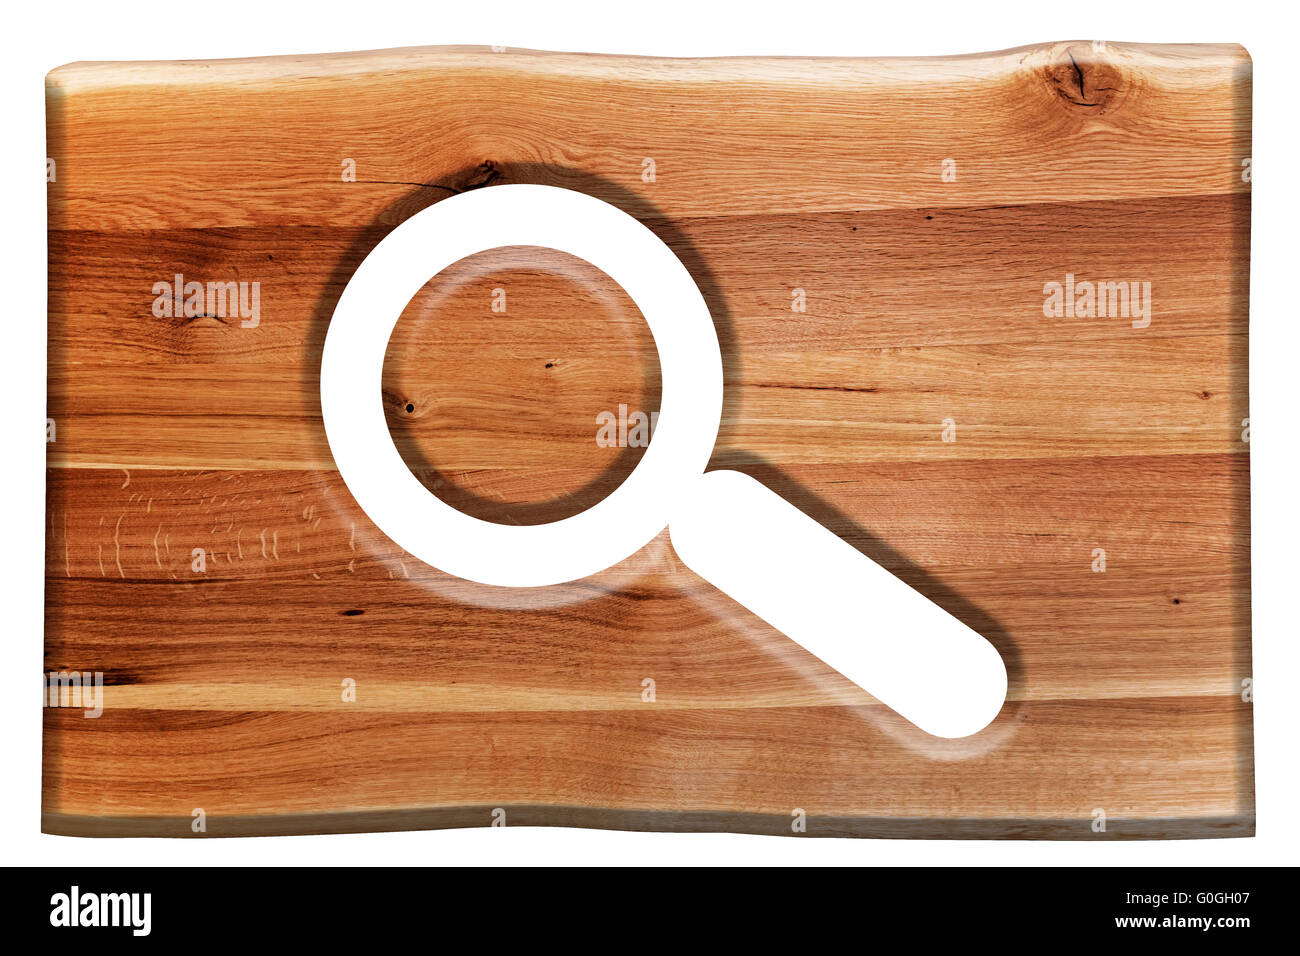 Magnifying glass symbol cut in wooden board isolated on white. Stock Photo